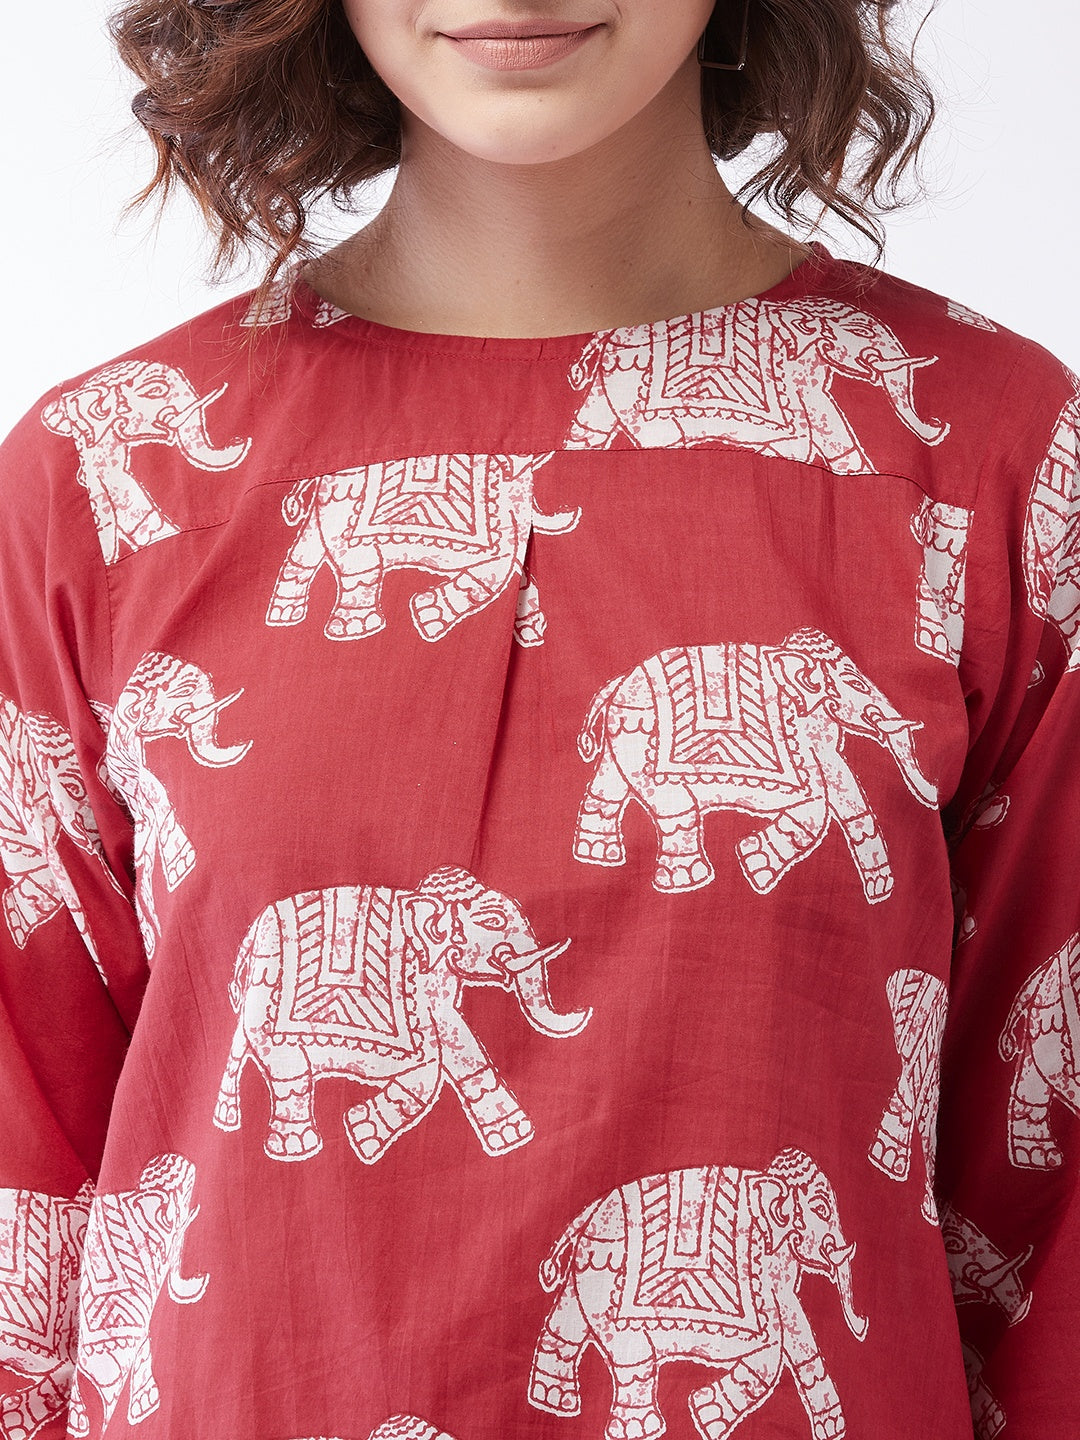 Red Elephant Top For Teens